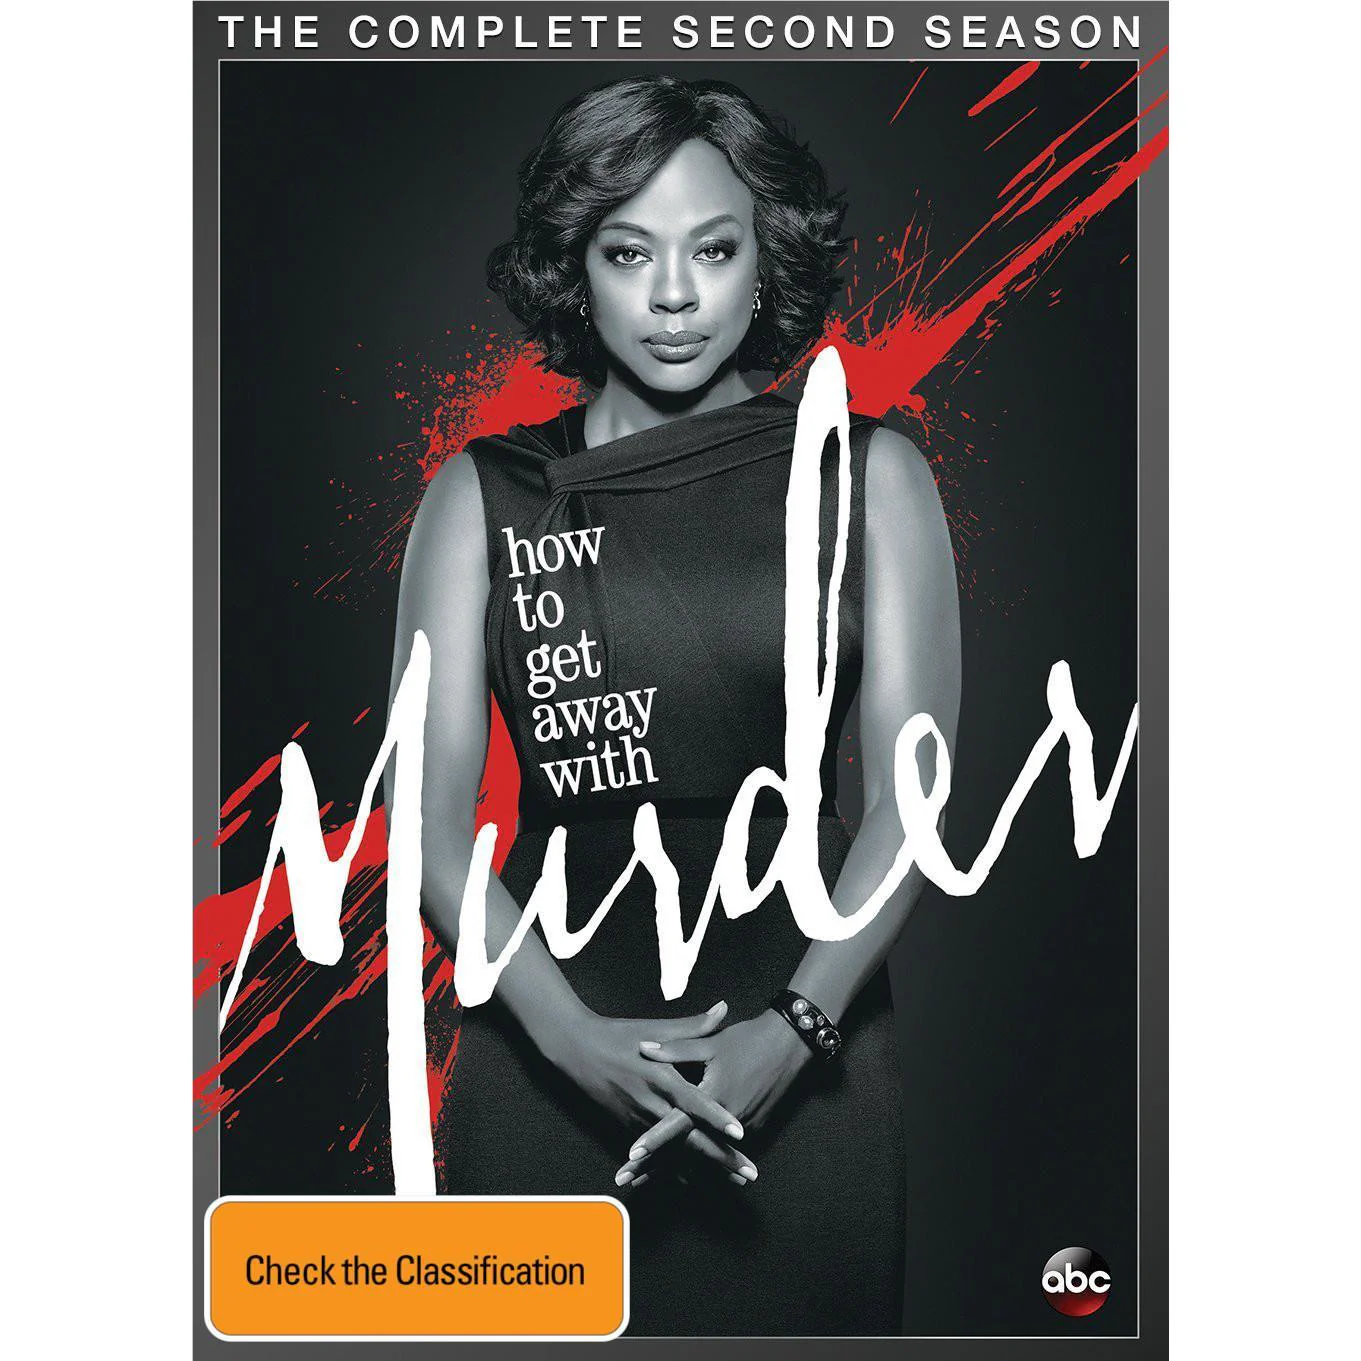 How to Get Away With Murder S02[2015][WEB-DL][NETFLIX][1080p][Latino]-TA_FI